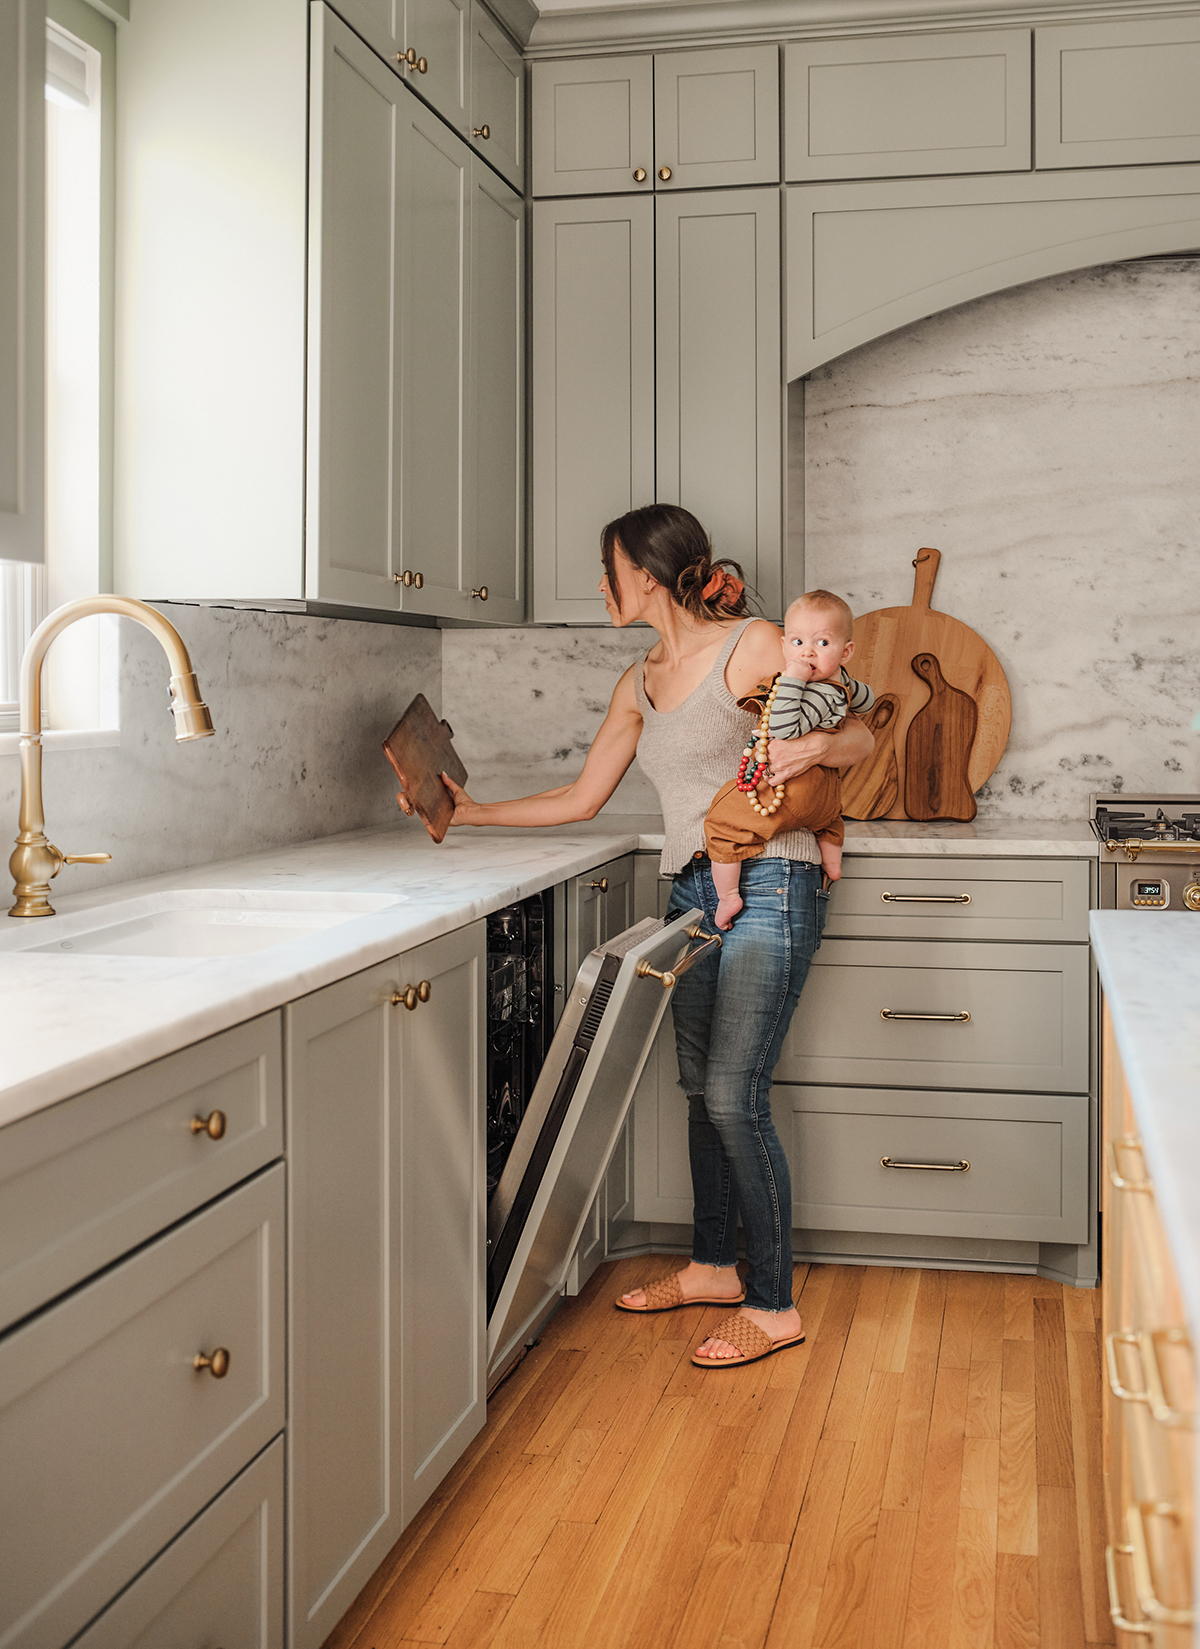 How to Decorate Kitchen Counters—Without Cluttering Your Prep Space